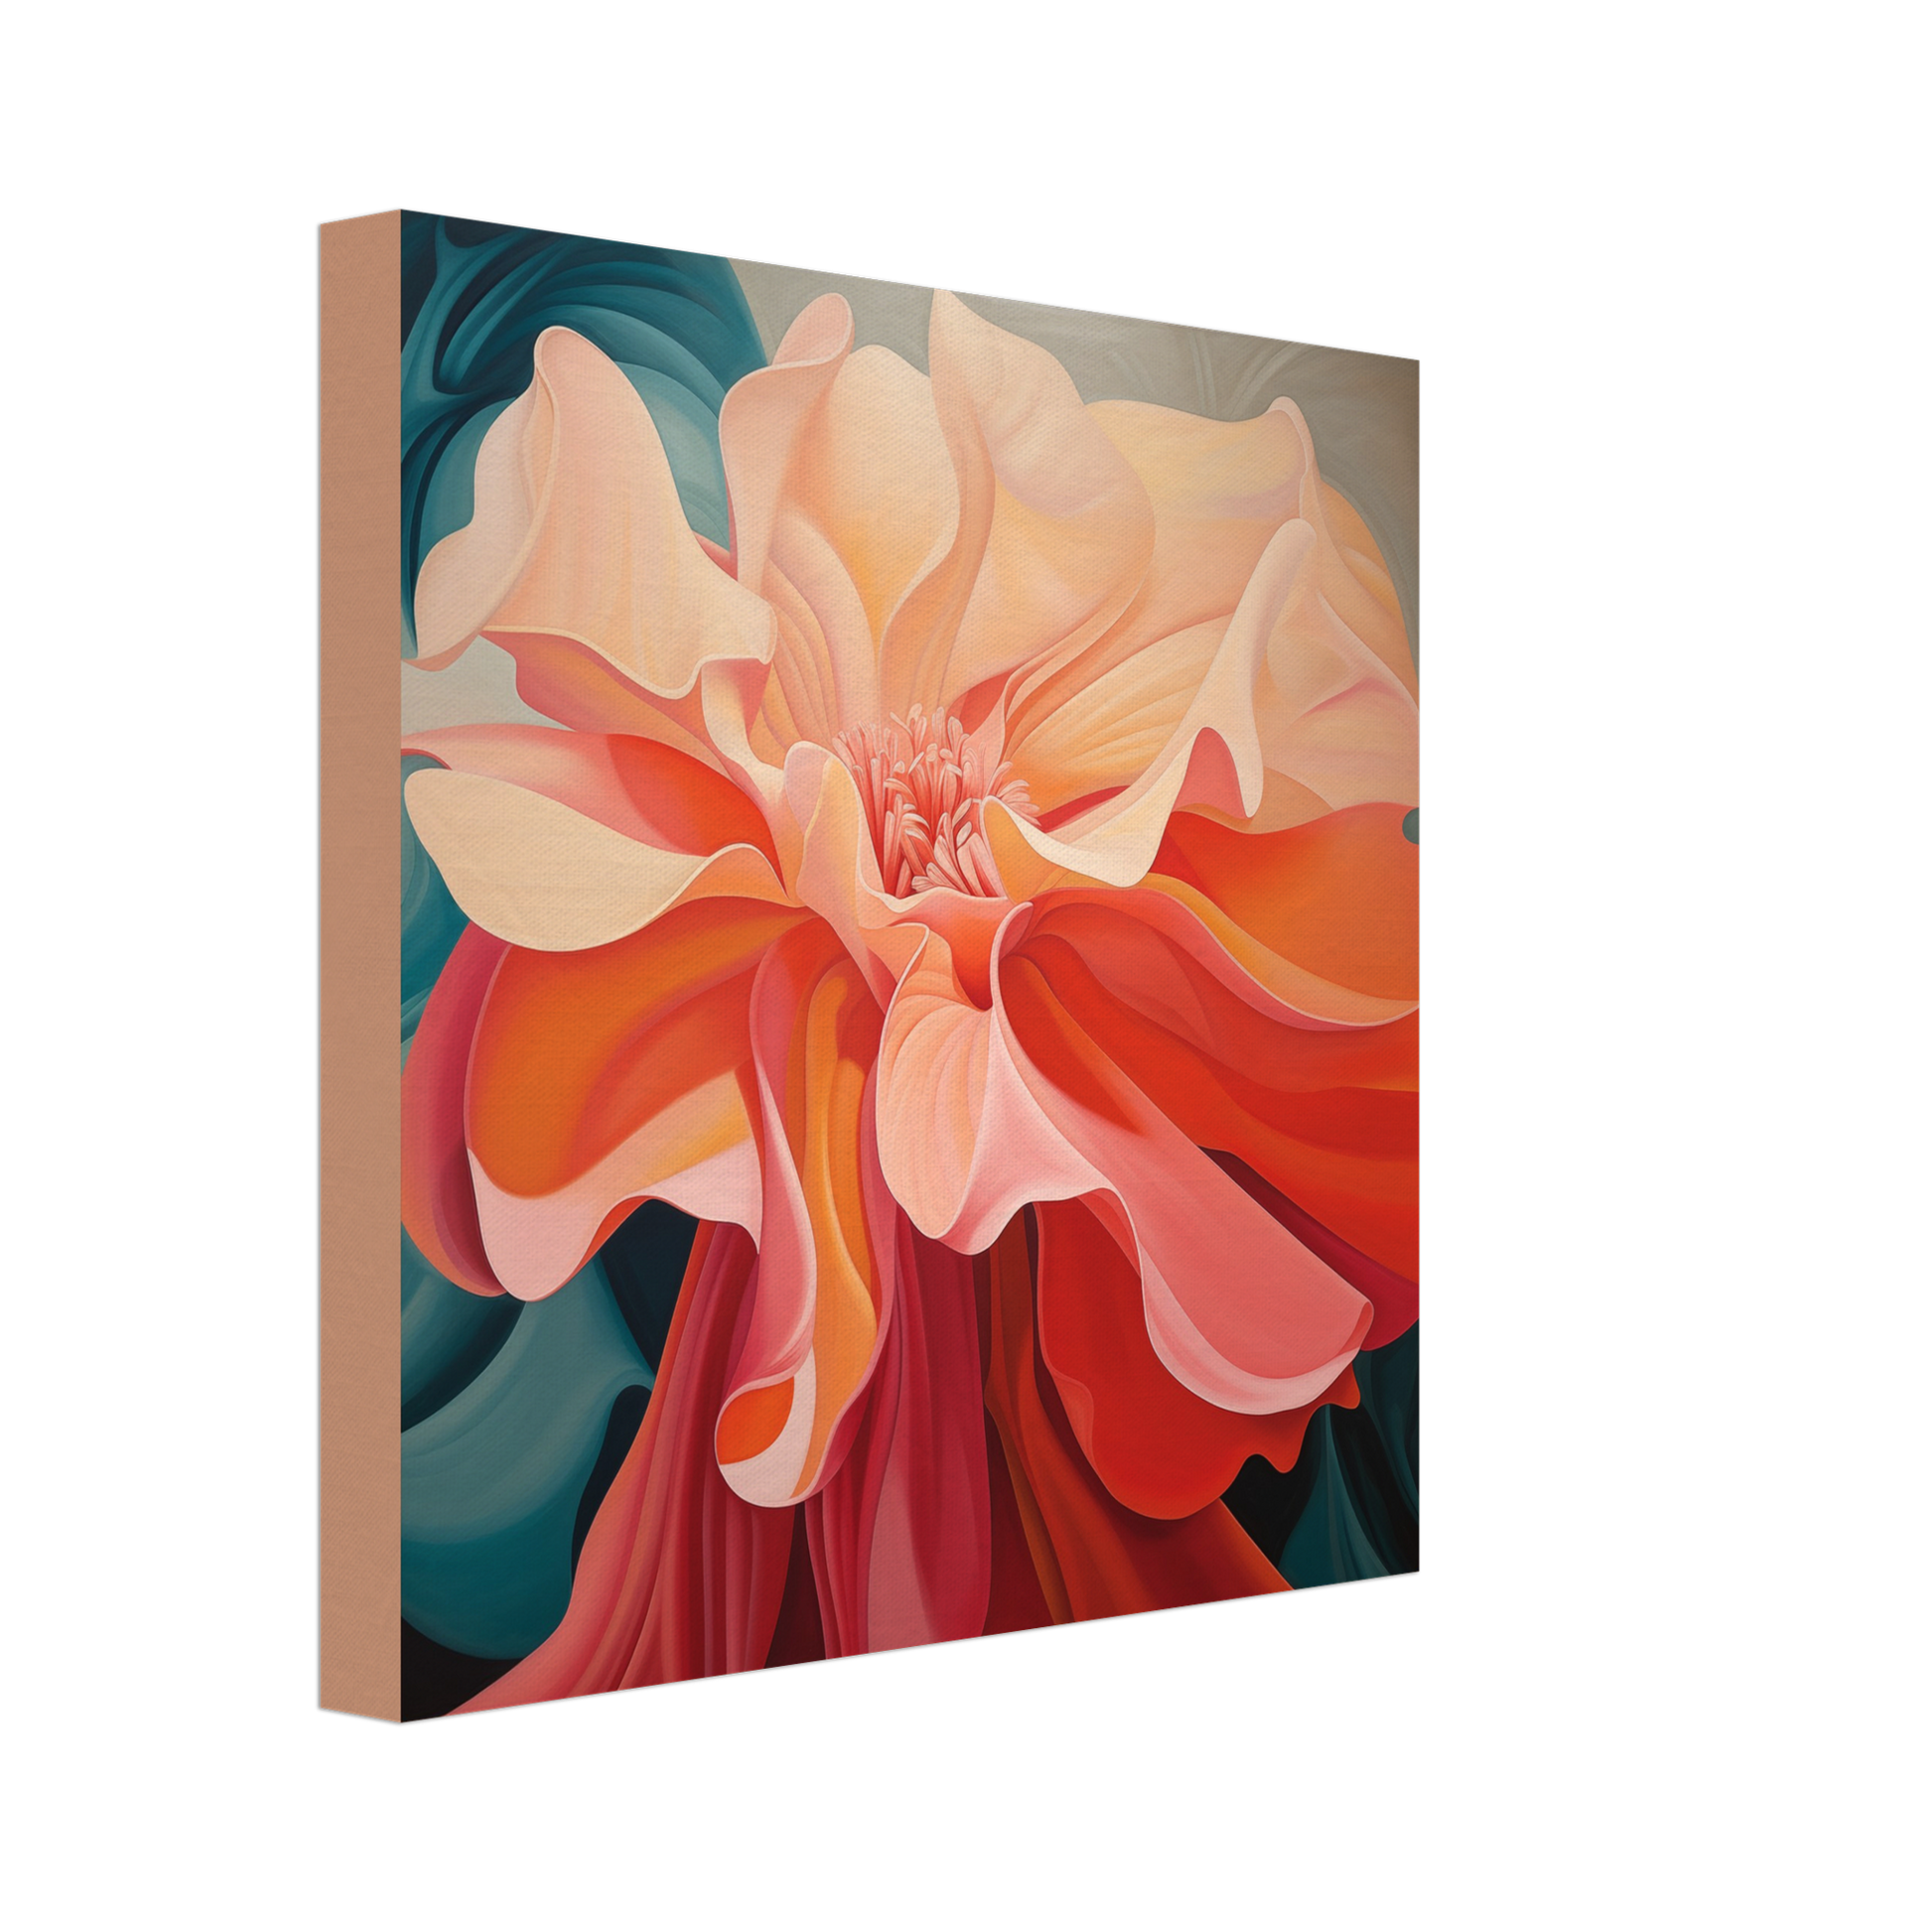 An abstract painting of The Wild In The Flower Inspired By Georgia O'Keefe - Canvas Print on a wooden frame, where the image quality and color remain unaffected.